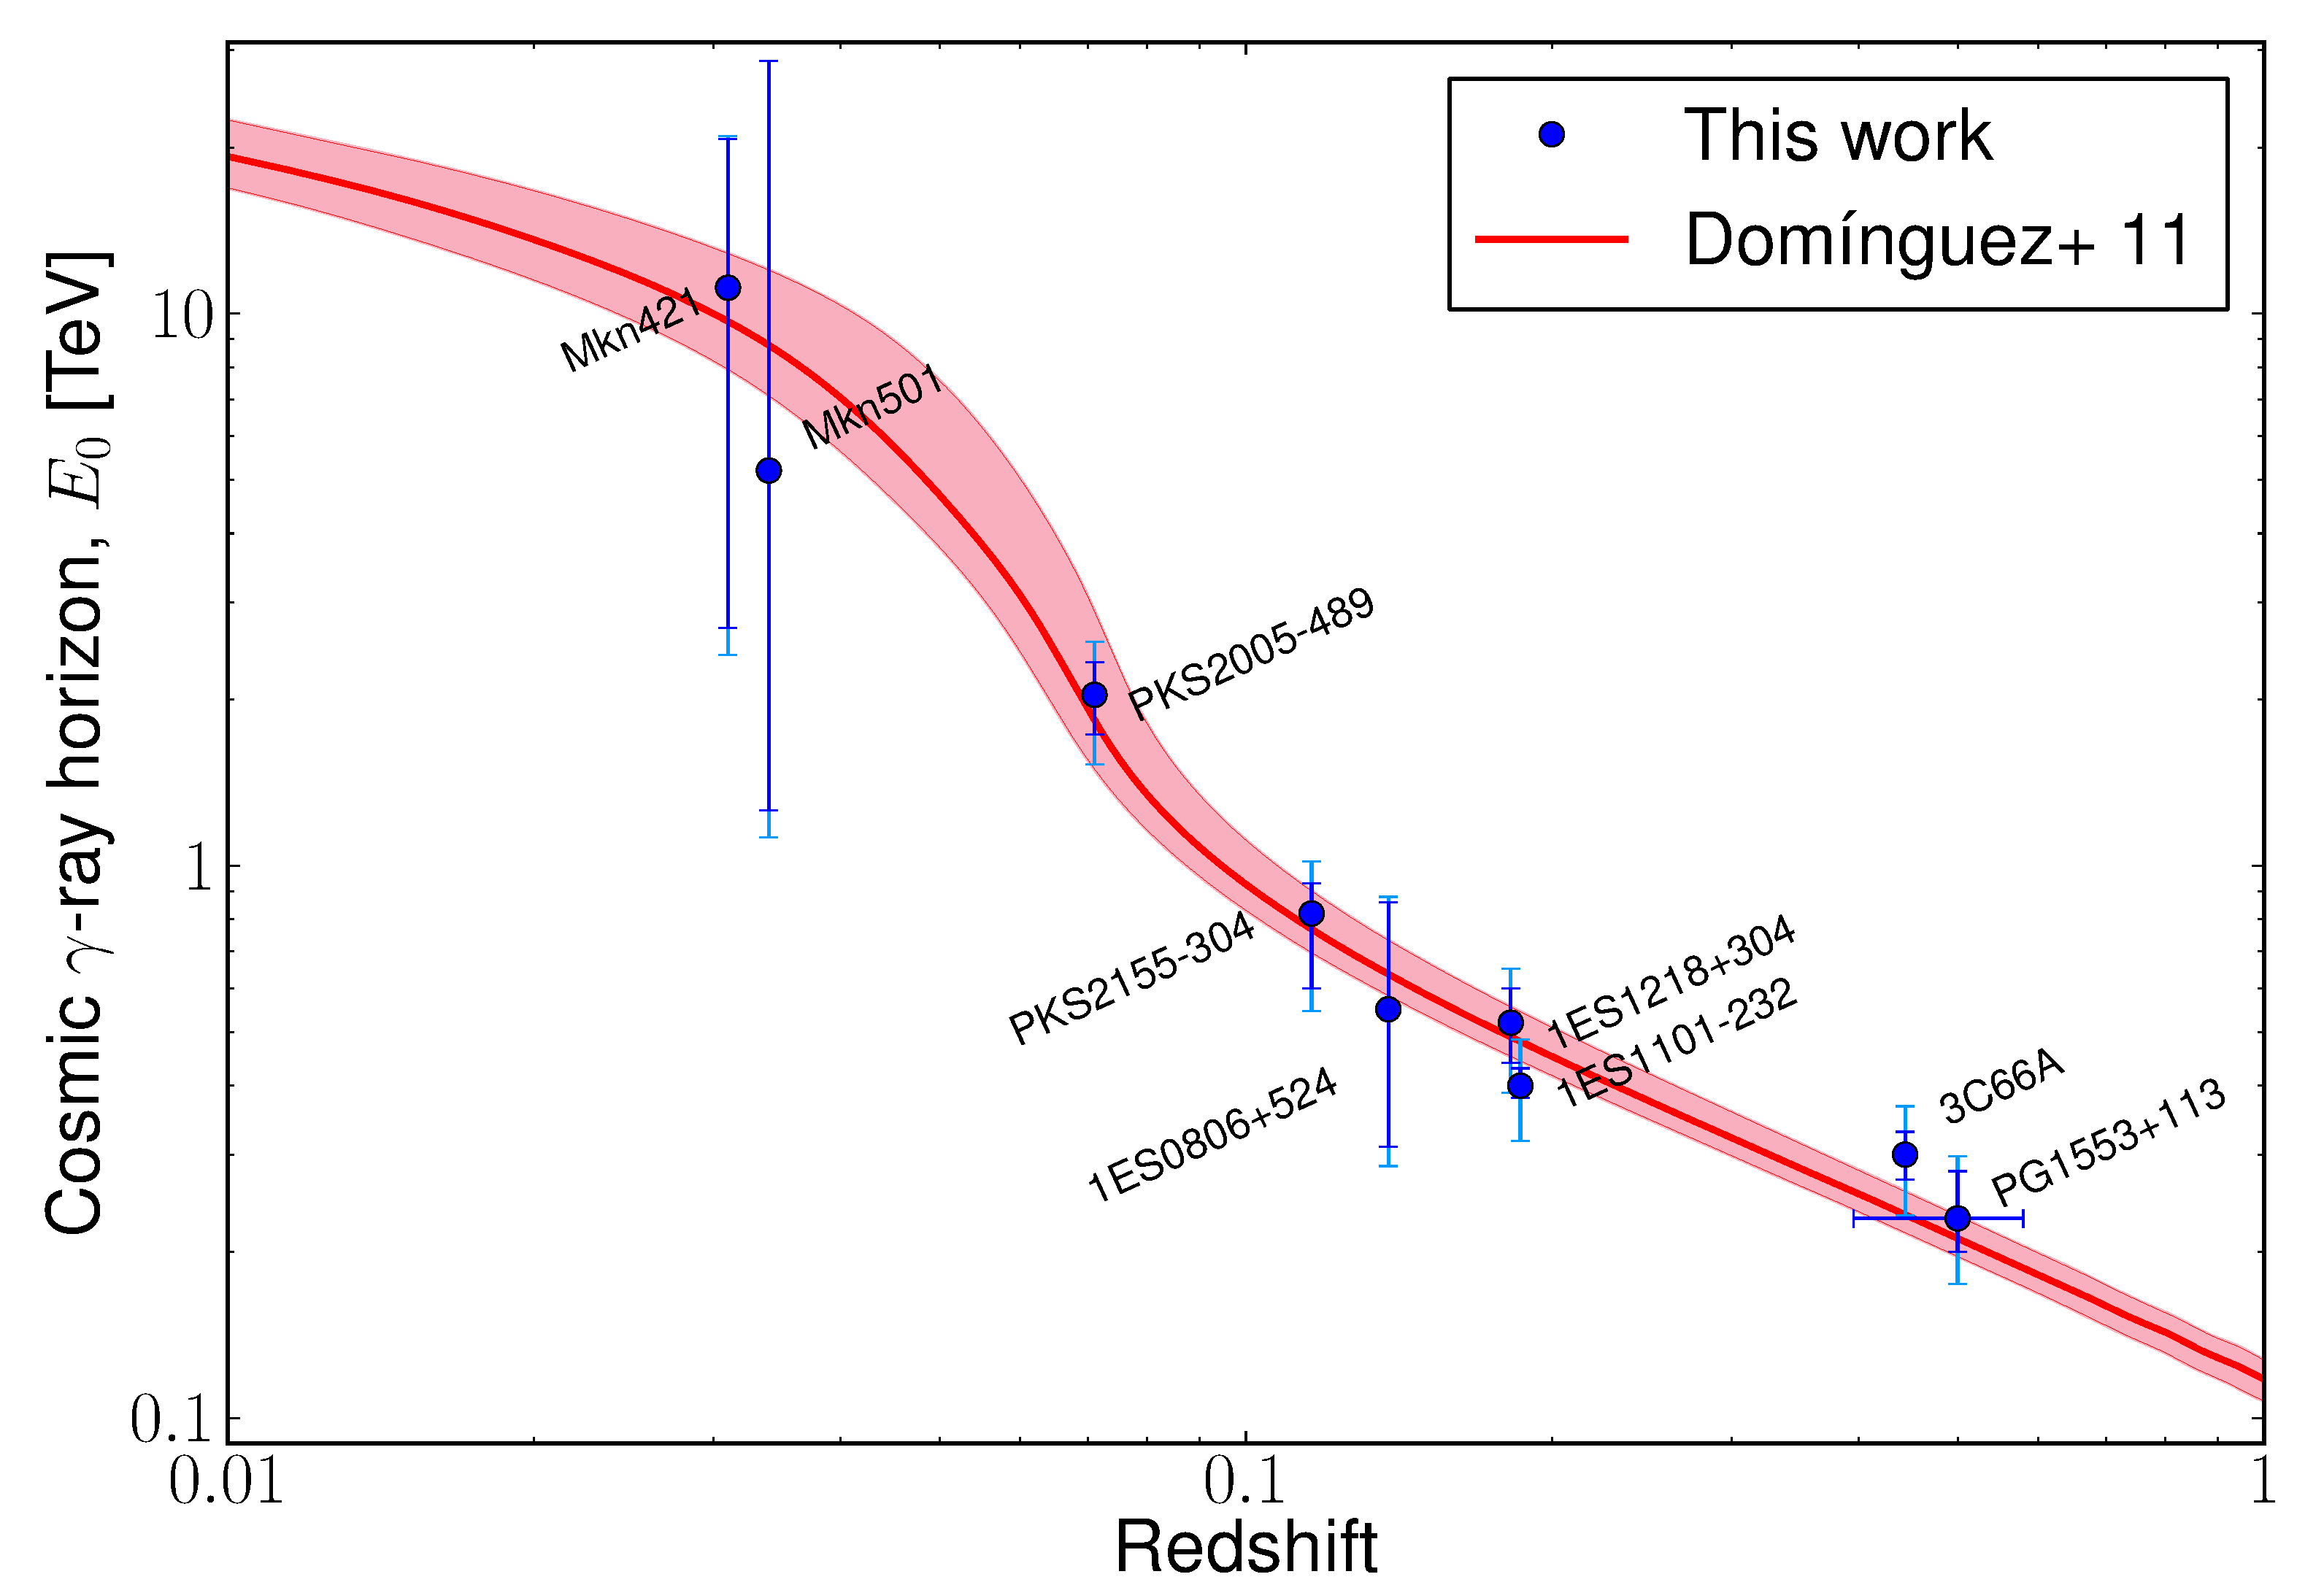 Figure 2 reproduced from Domínguez et al. The cosmic gamma-ray horizon estimated from a sample of 15 blazars by Domínguez et al. Dark blue lines are statistical uncertainties; light blue lines are statistical and 20% systematic uncertainties. The red line is a model.